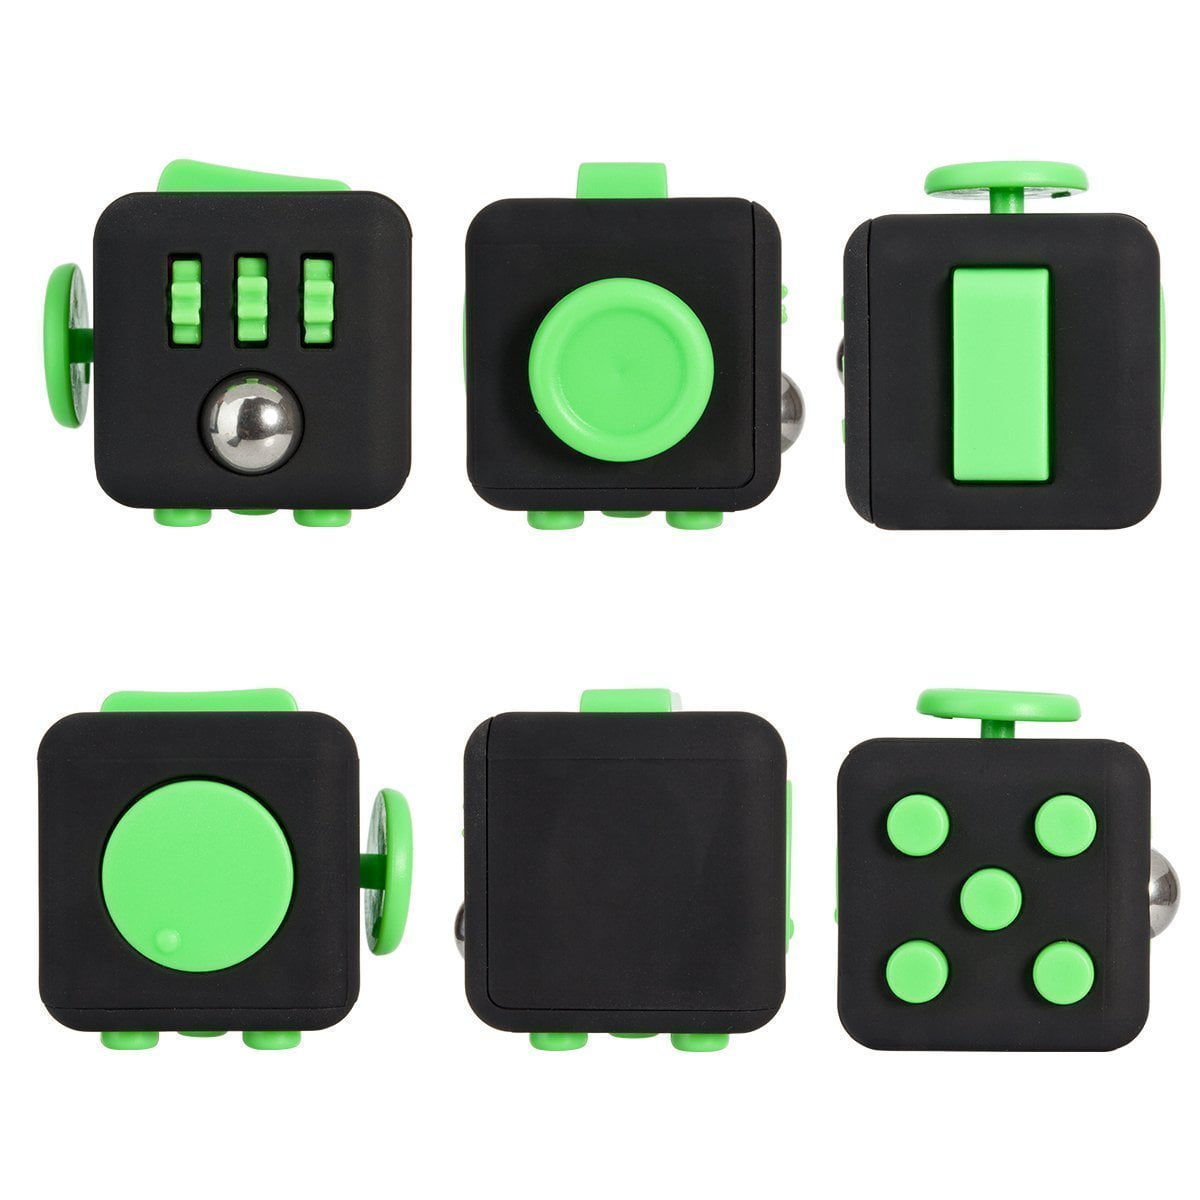 Vhem Fidget Cube Relieves Stress And Anxiety For Children And Adults Anxiety Attention Toy Walmart Com